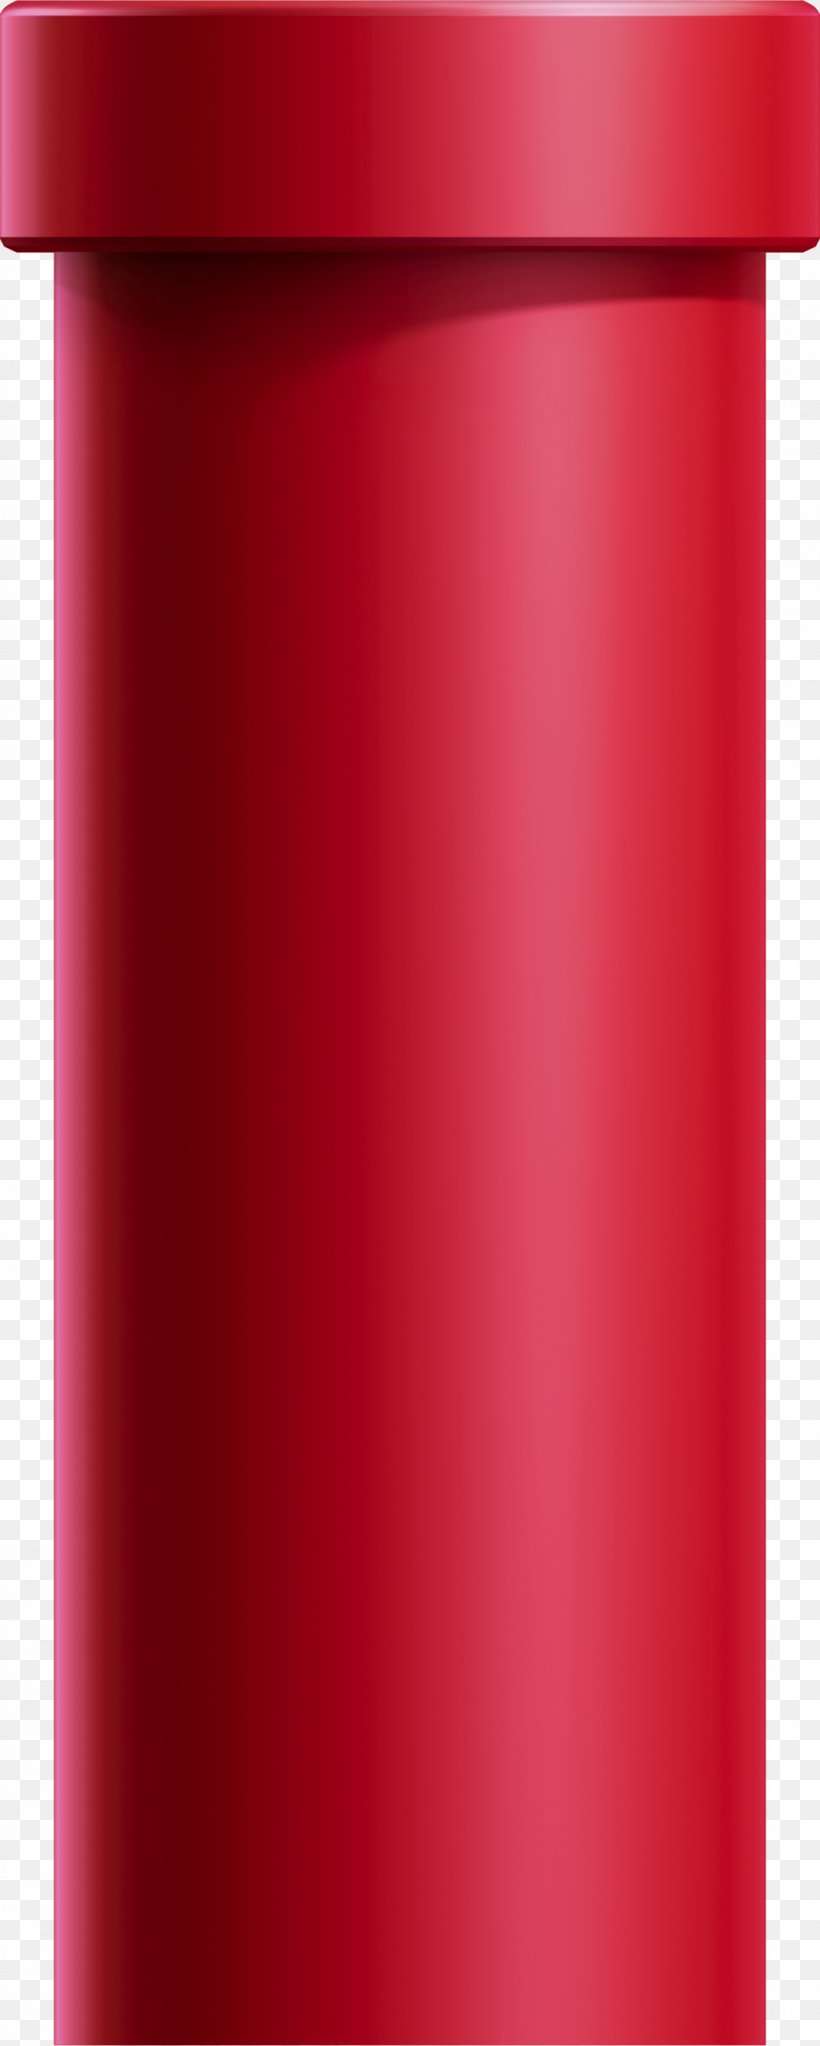 Cylinder, PNG, 1087x2713px, Cylinder, Red Download Free